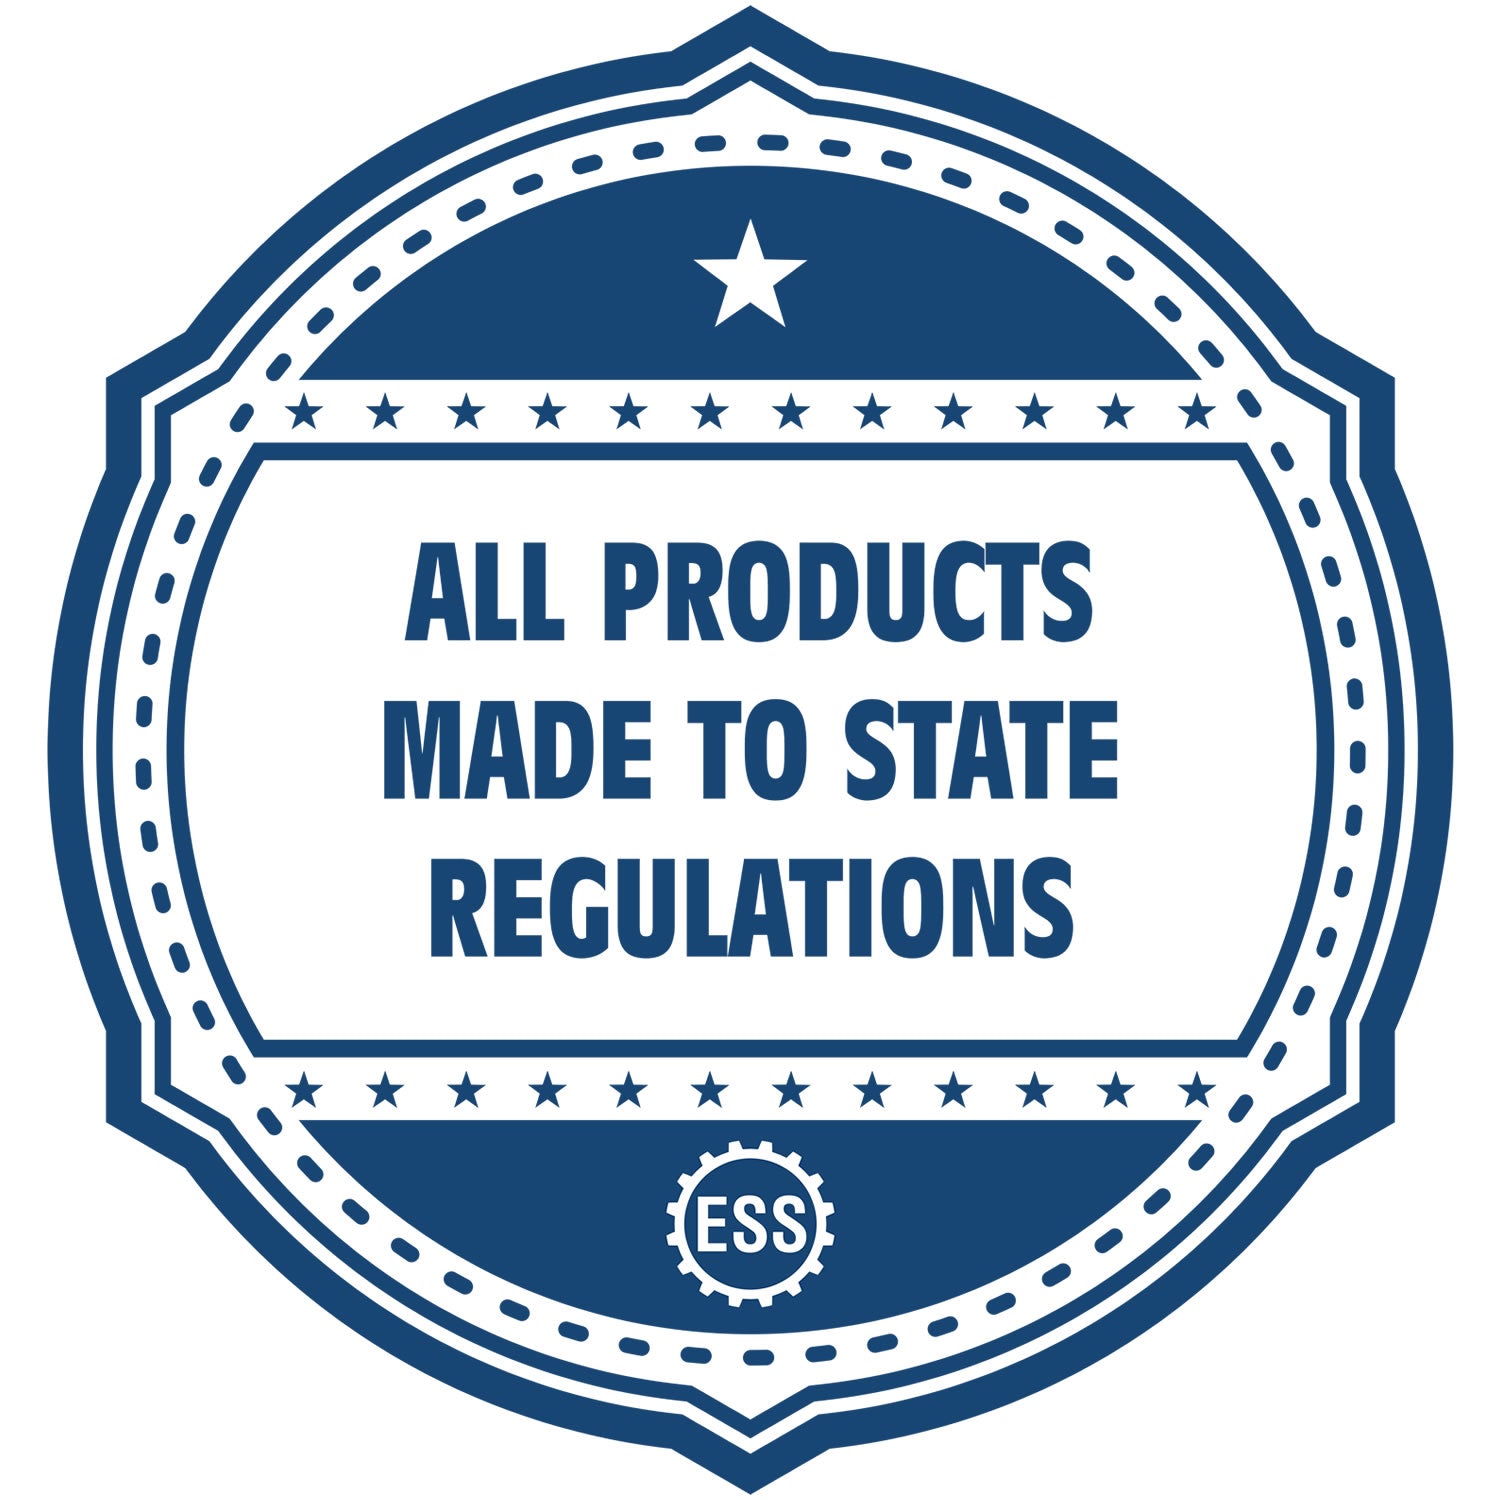 An icon or badge element for the Long Reach Virginia Land Surveyor Seal showing that this product is made in compliance with state regulations.